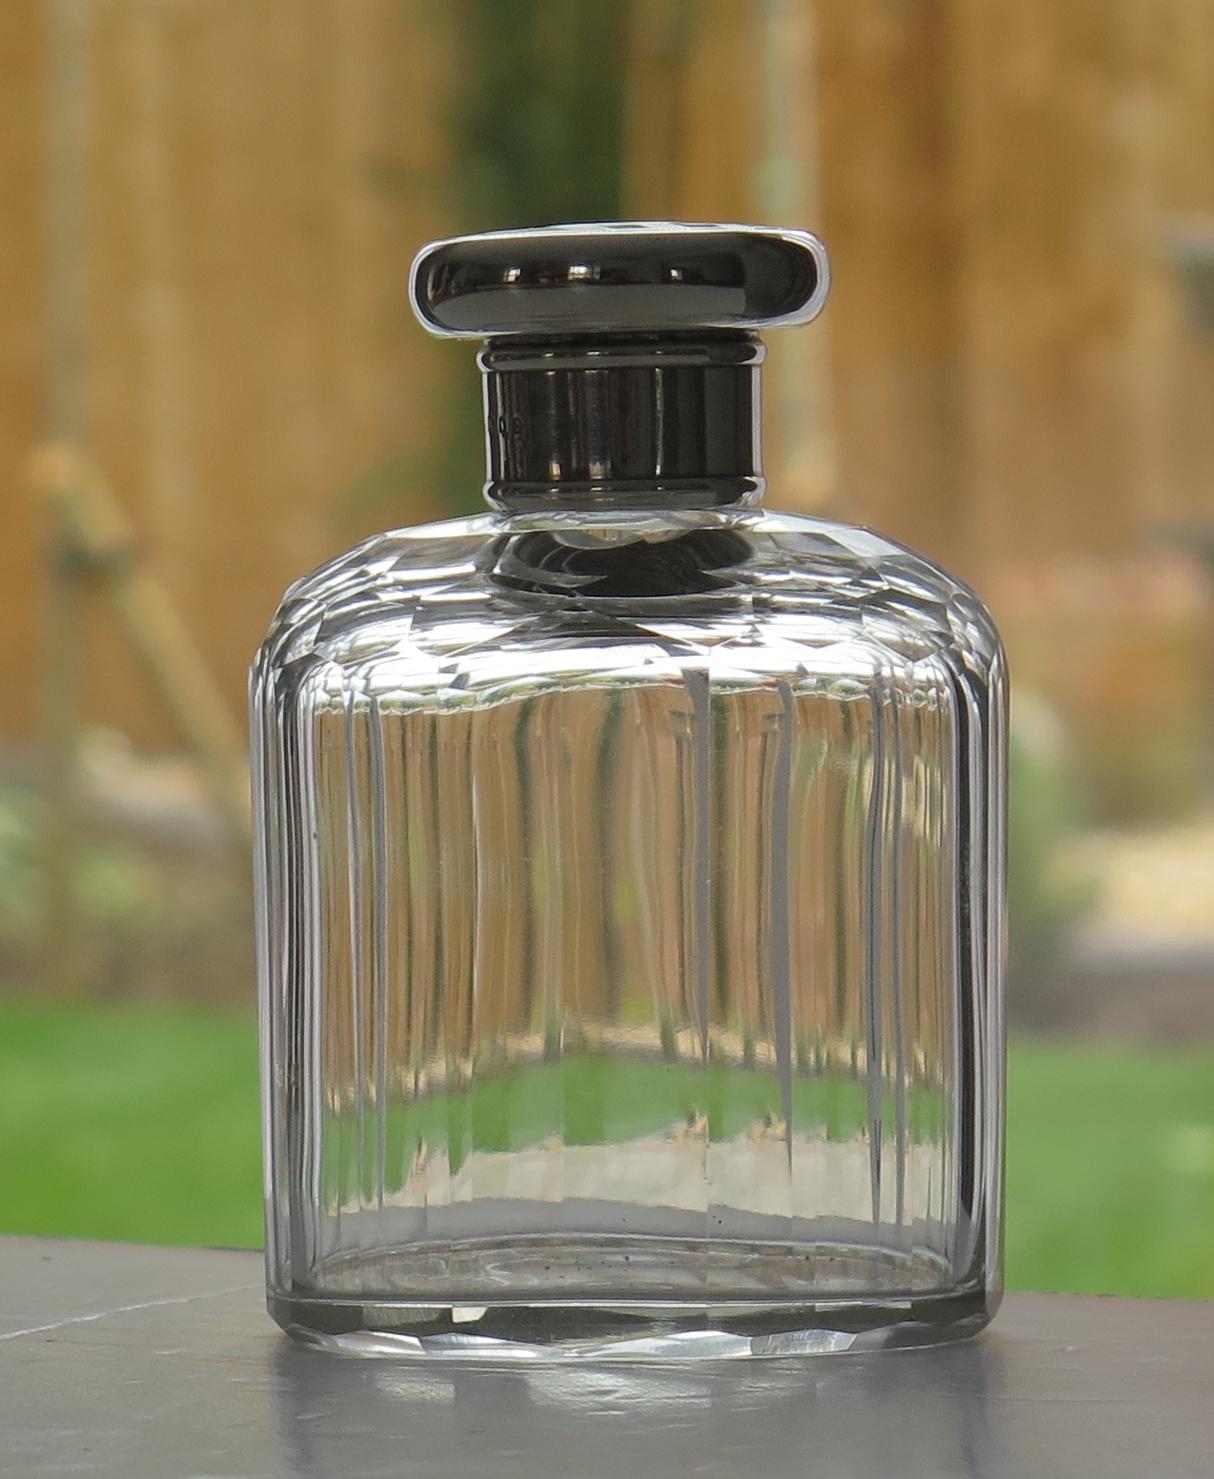 This is a very good quality crystal cut glass cologne or perfume bottle with a sterling silver screw top lid, made in London and dating to the early Art Deco period, 1919.

The clear glass bottle or jar has a rectilinear shape, having an oval